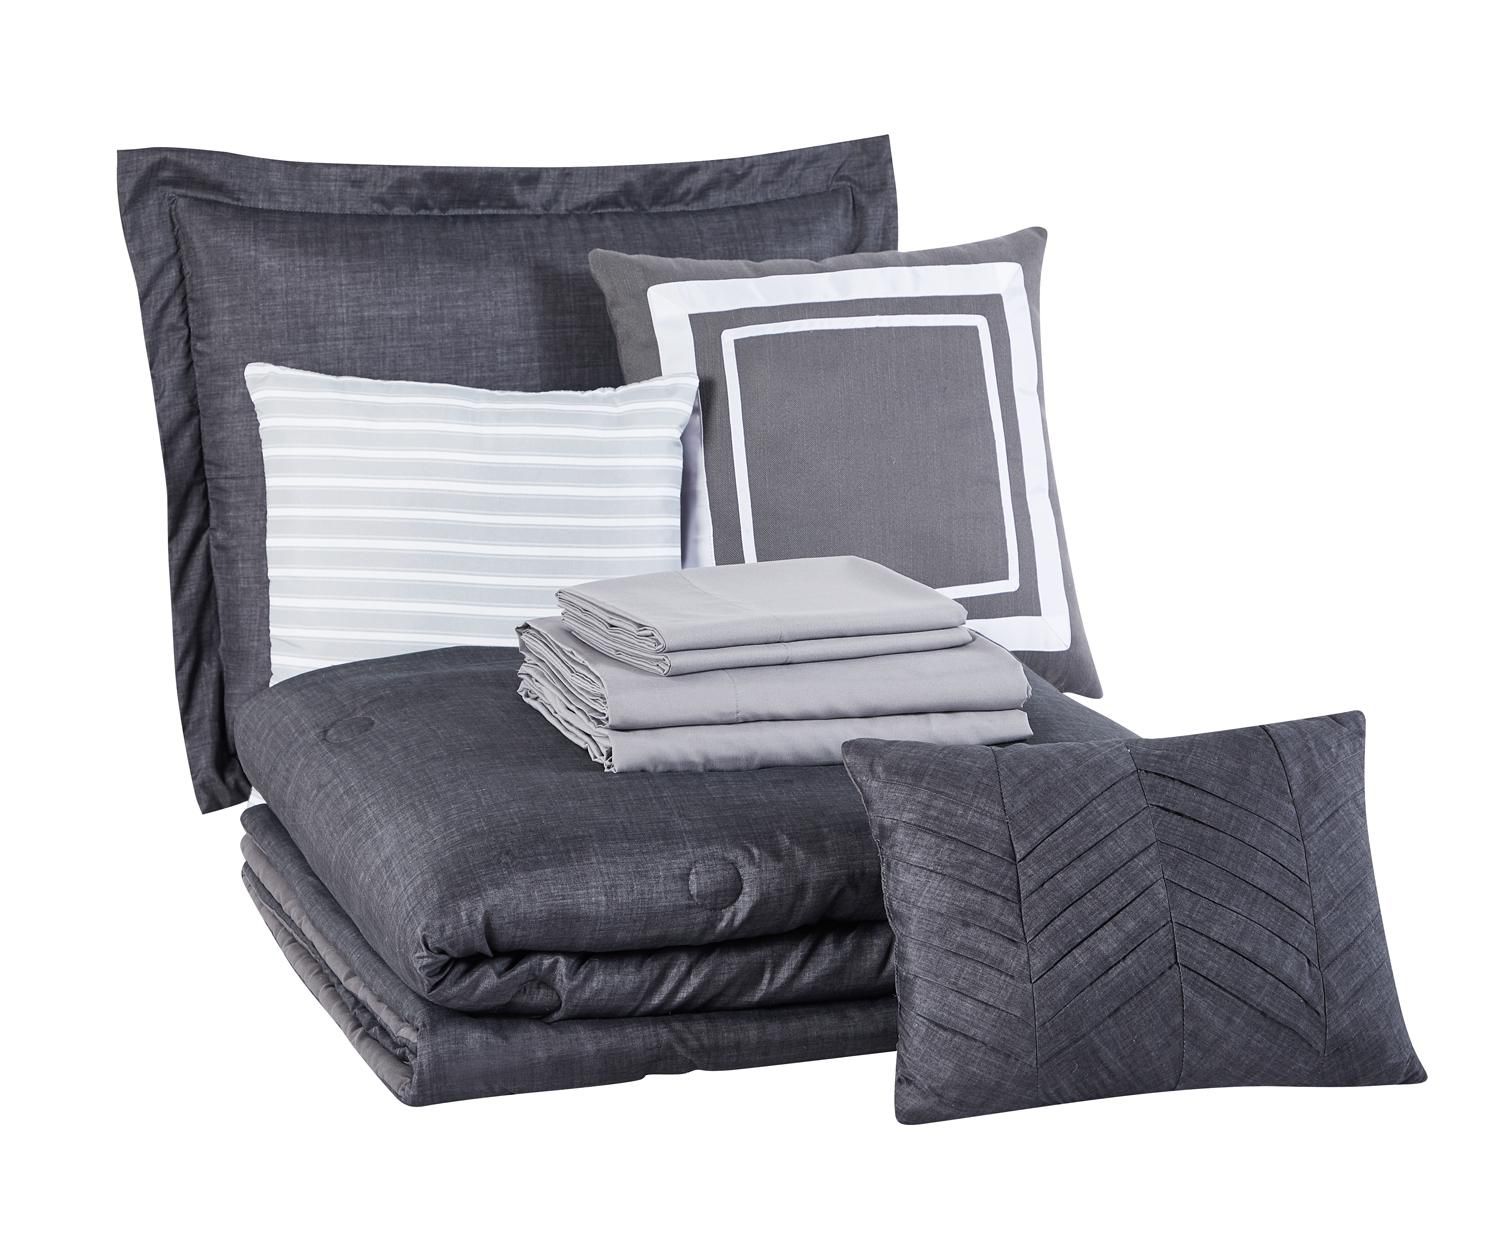 Mainstays Gray Textured 10-Piece Bed in a Bag Coordinating Bedding